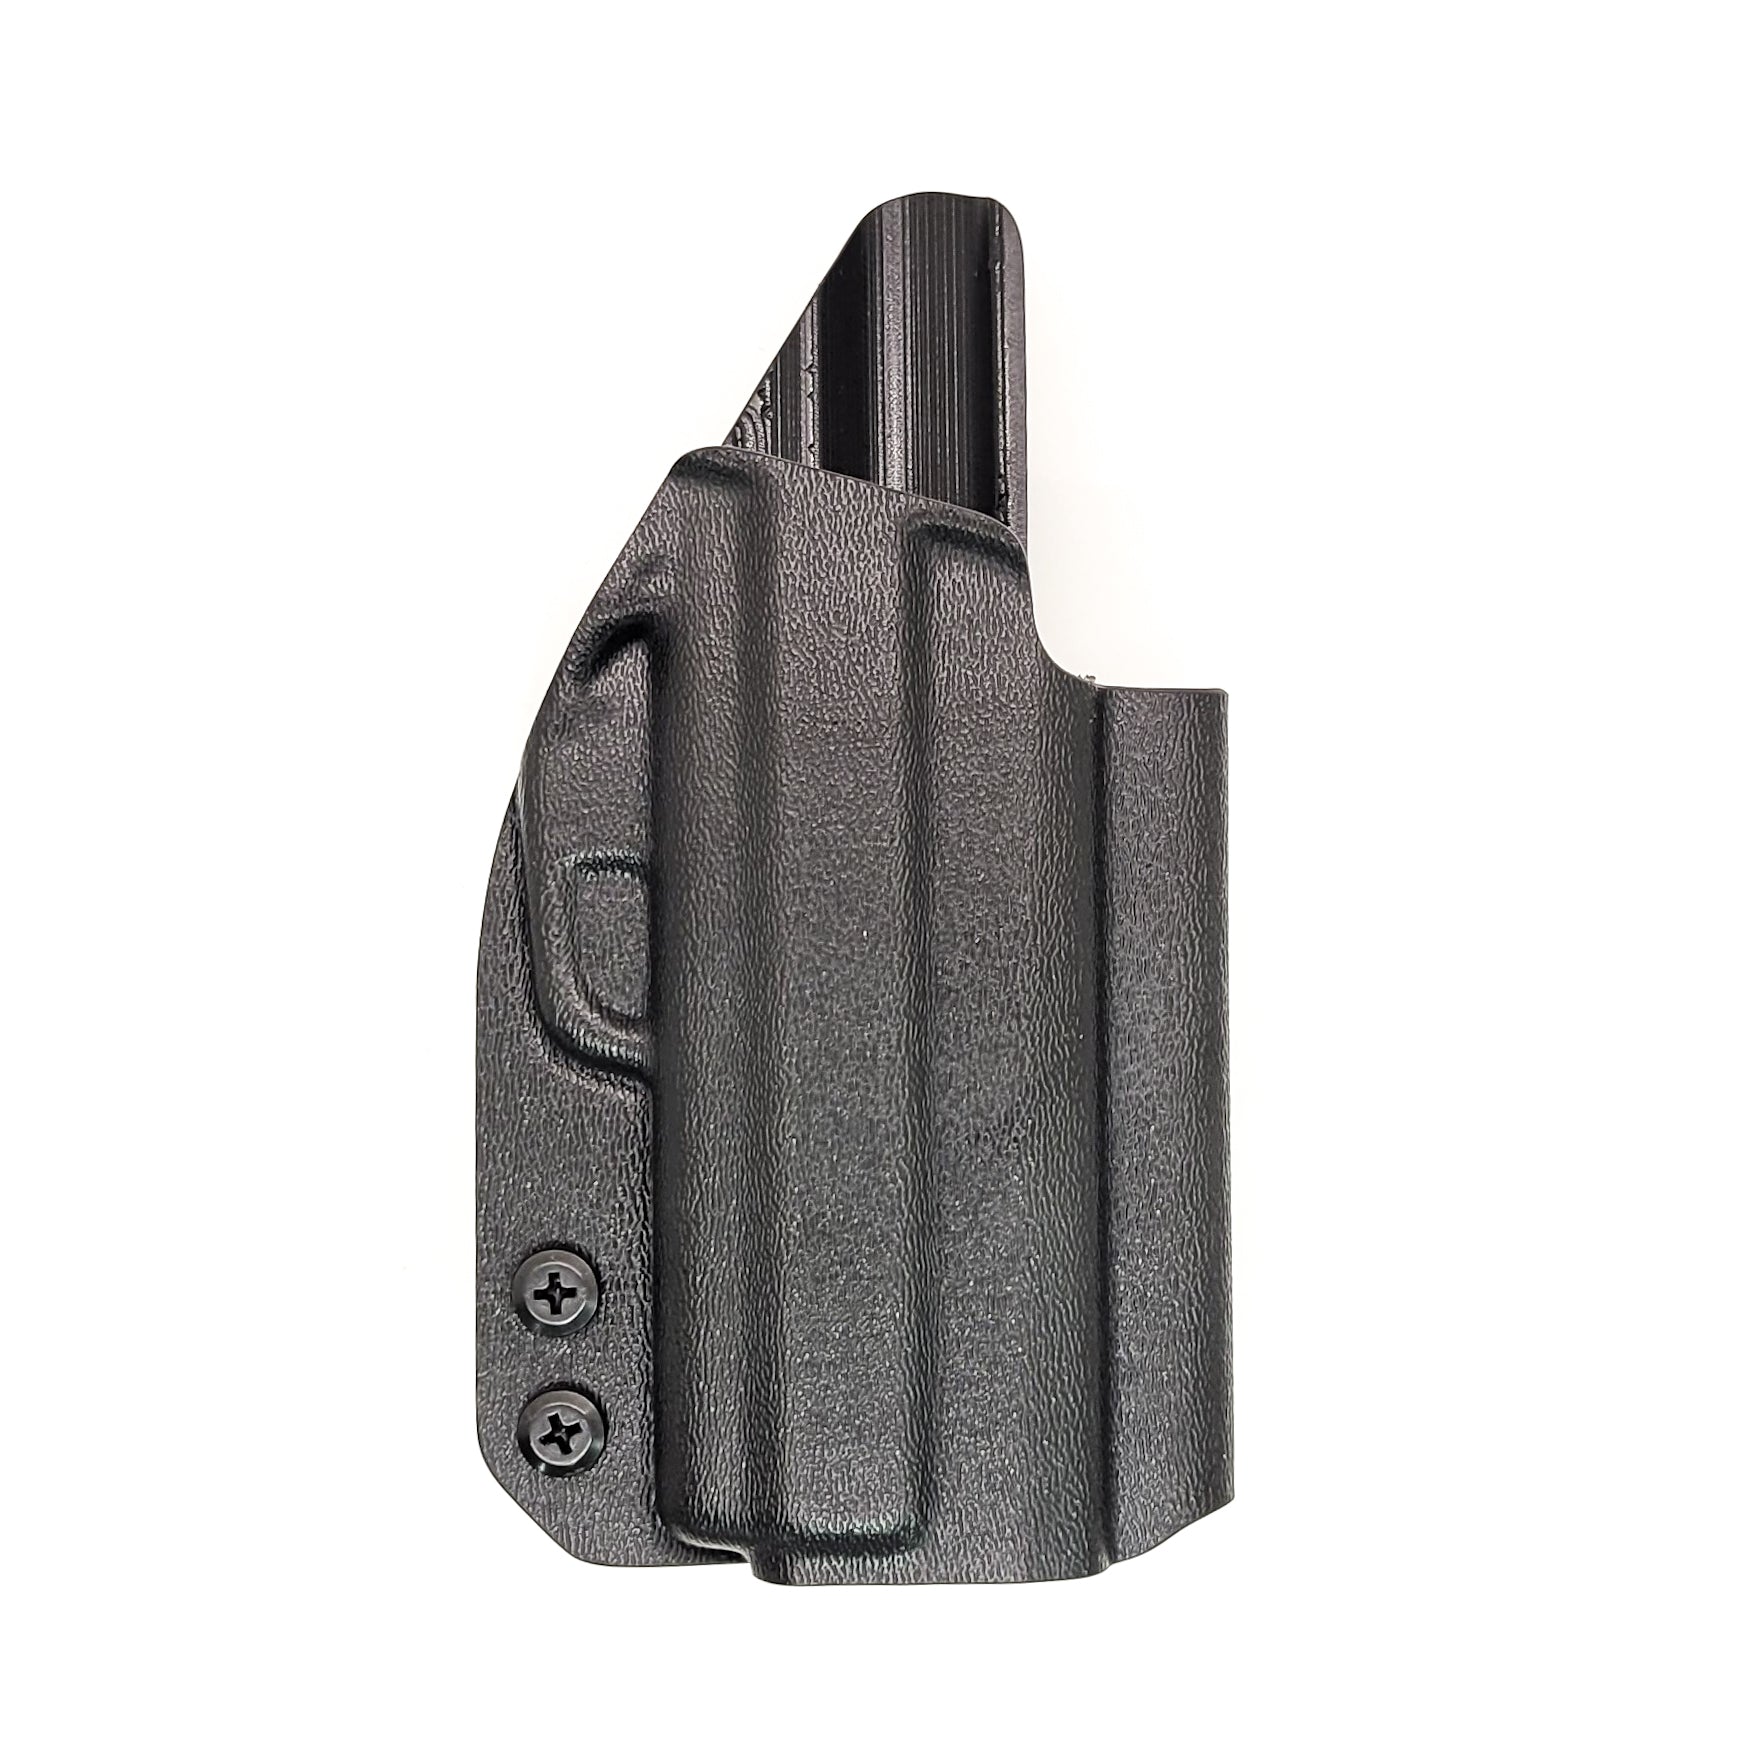 For the best, most comfortable Outside Waistband OWB Kydex Holster designed to fit the Sig Sauer P365-XMACRO, P365-XMACRO COMP, P365-XMACRO TACOPS, and P365-XMACRO COMP ROMEOZERO ELITE. with the GoGunsUSA Gas Pedal. shop Four Brothers 4BROS holsters. Adjustable retention & cant smooth edges for comfort & concealment 